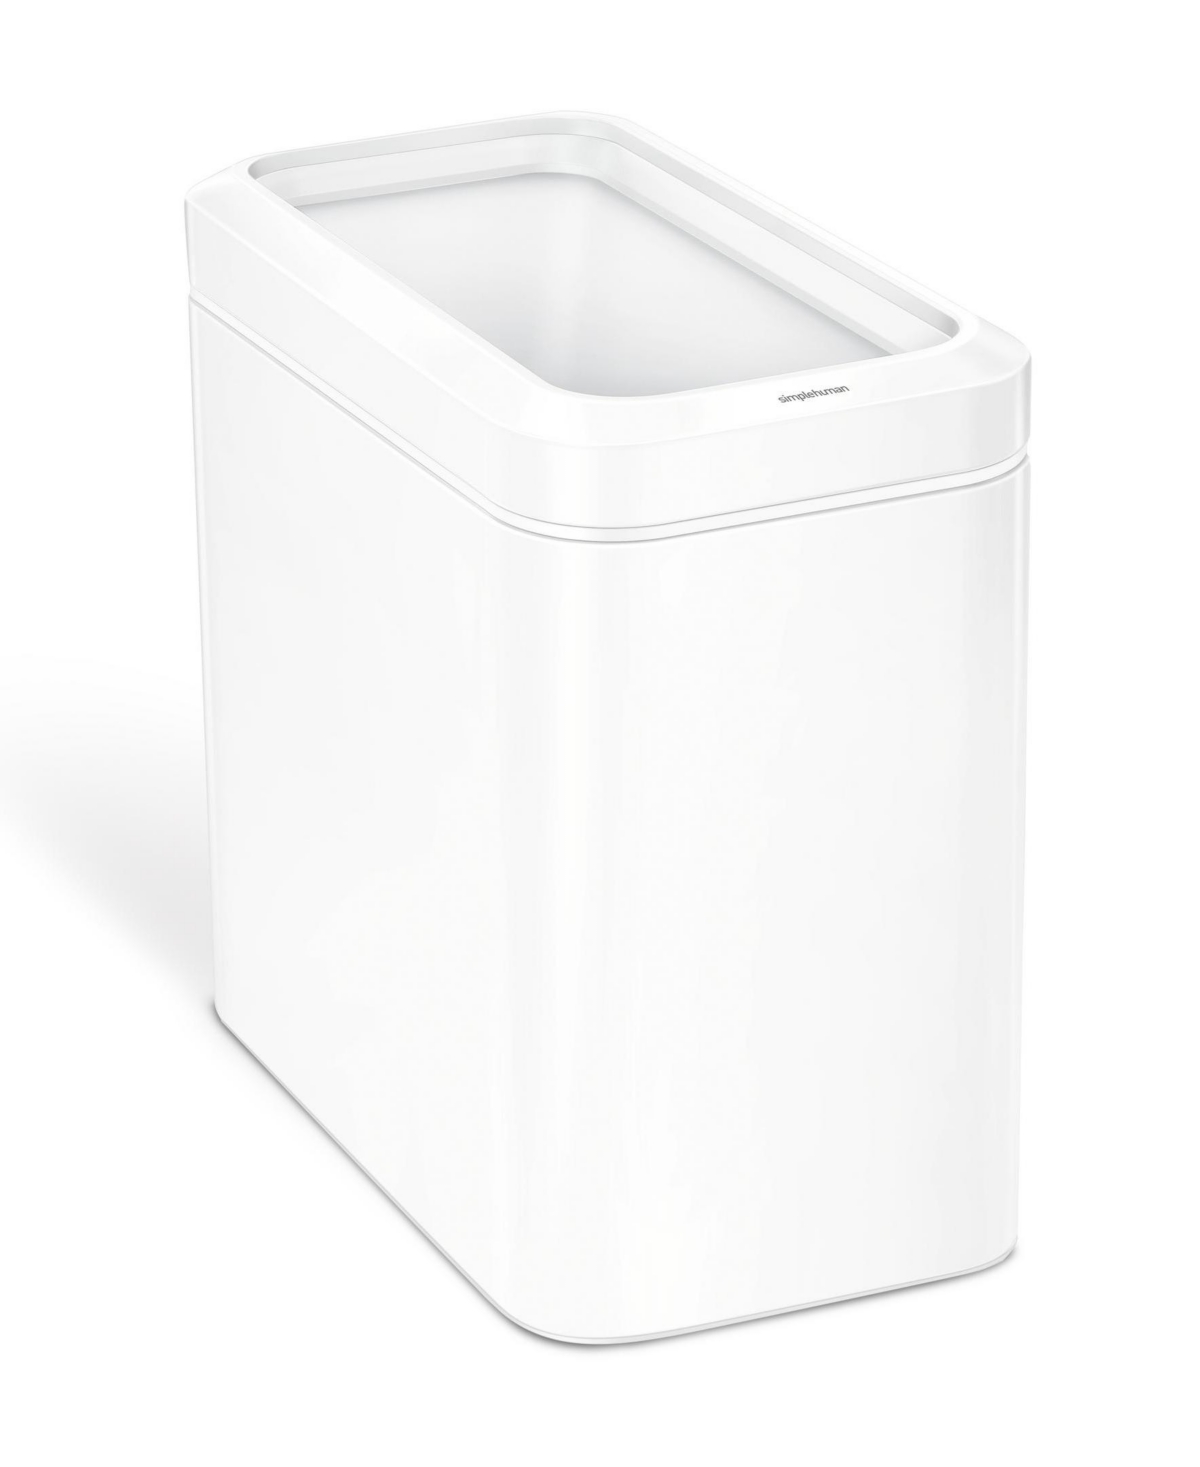 25L Slim Open Can - White Stainless Steel